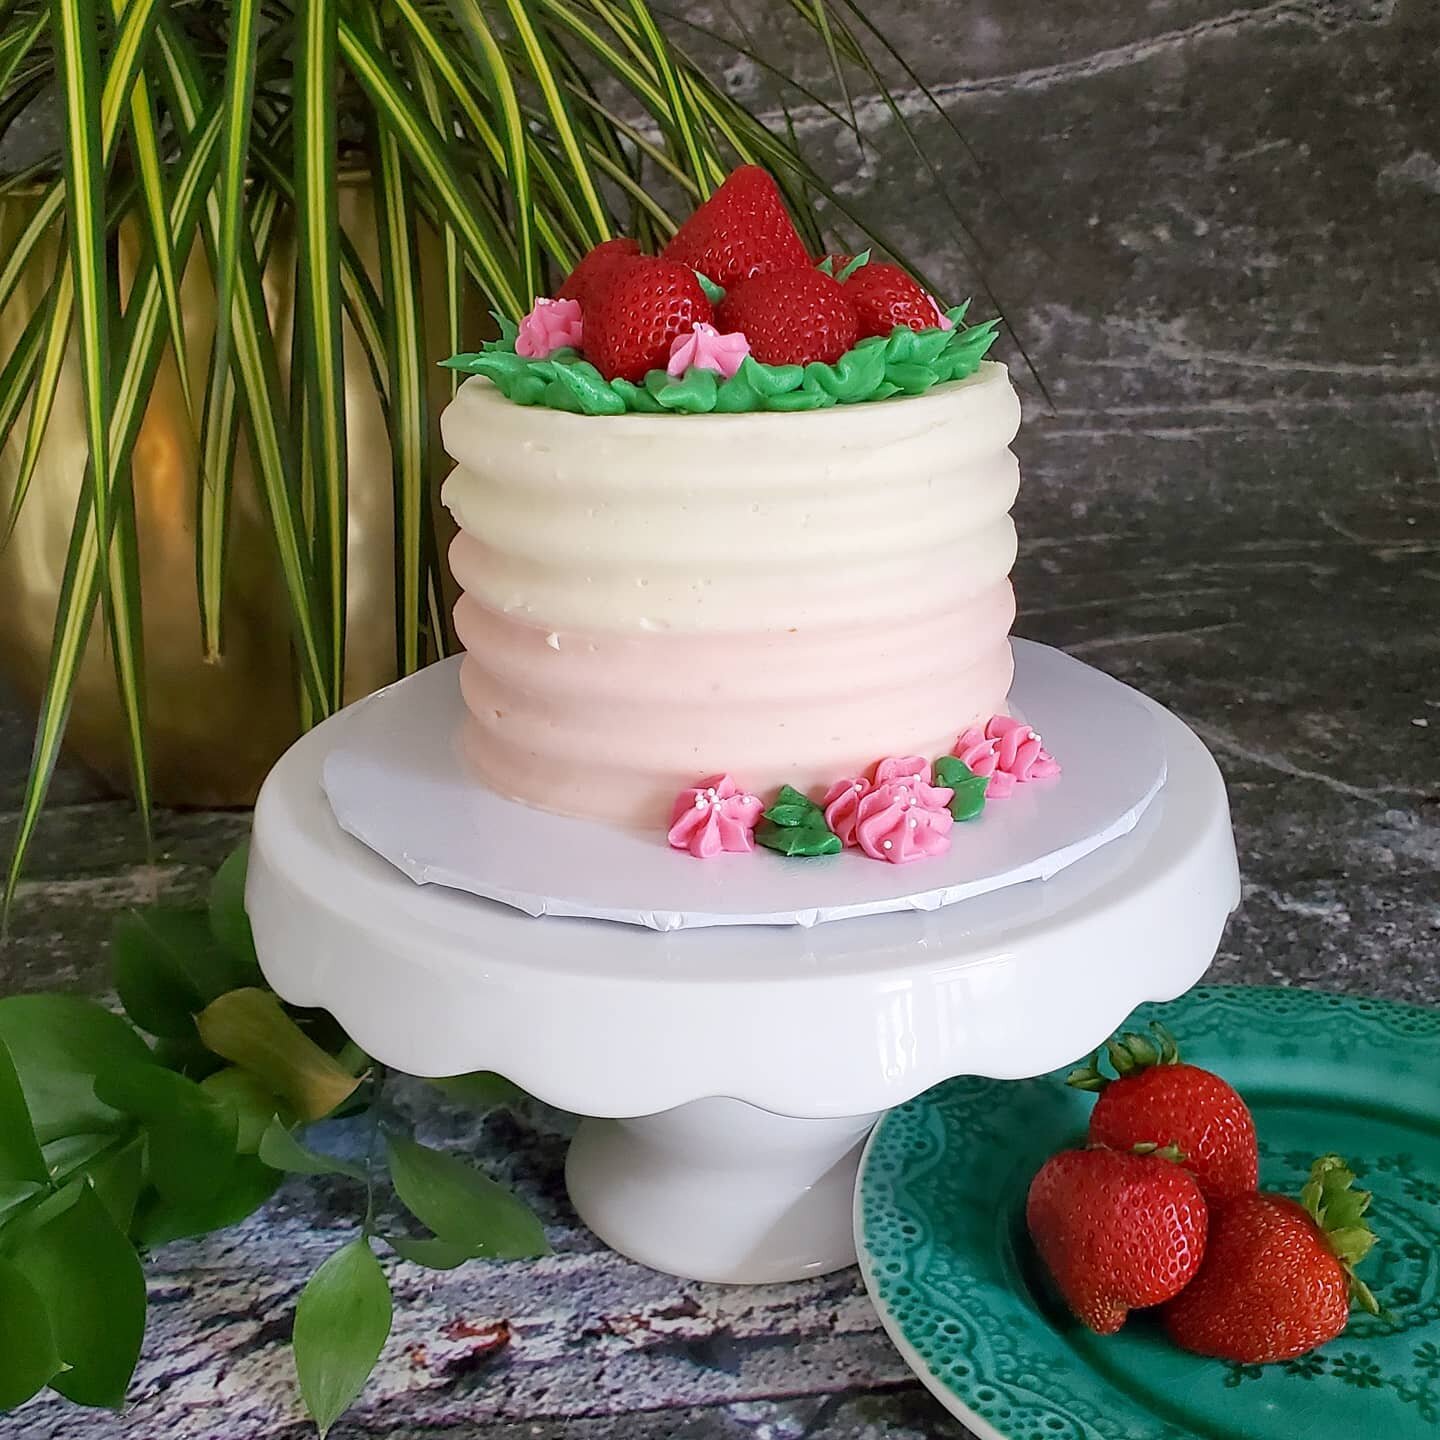 𝔹𝕖𝕣𝕣𝕪 𝕊𝕨𝕖𝕖𝕥 𝕆𝕟𝕖 🍓

》》smash cake love 💕 vanilla cake, buttercream, and fresh strawberries. 
▪︎
▪︎
▪︎
I'm pretty sure smash cakes will remain one of my favorites to do. This one was simple and adorable. 

》》July calendar has ONE opening 